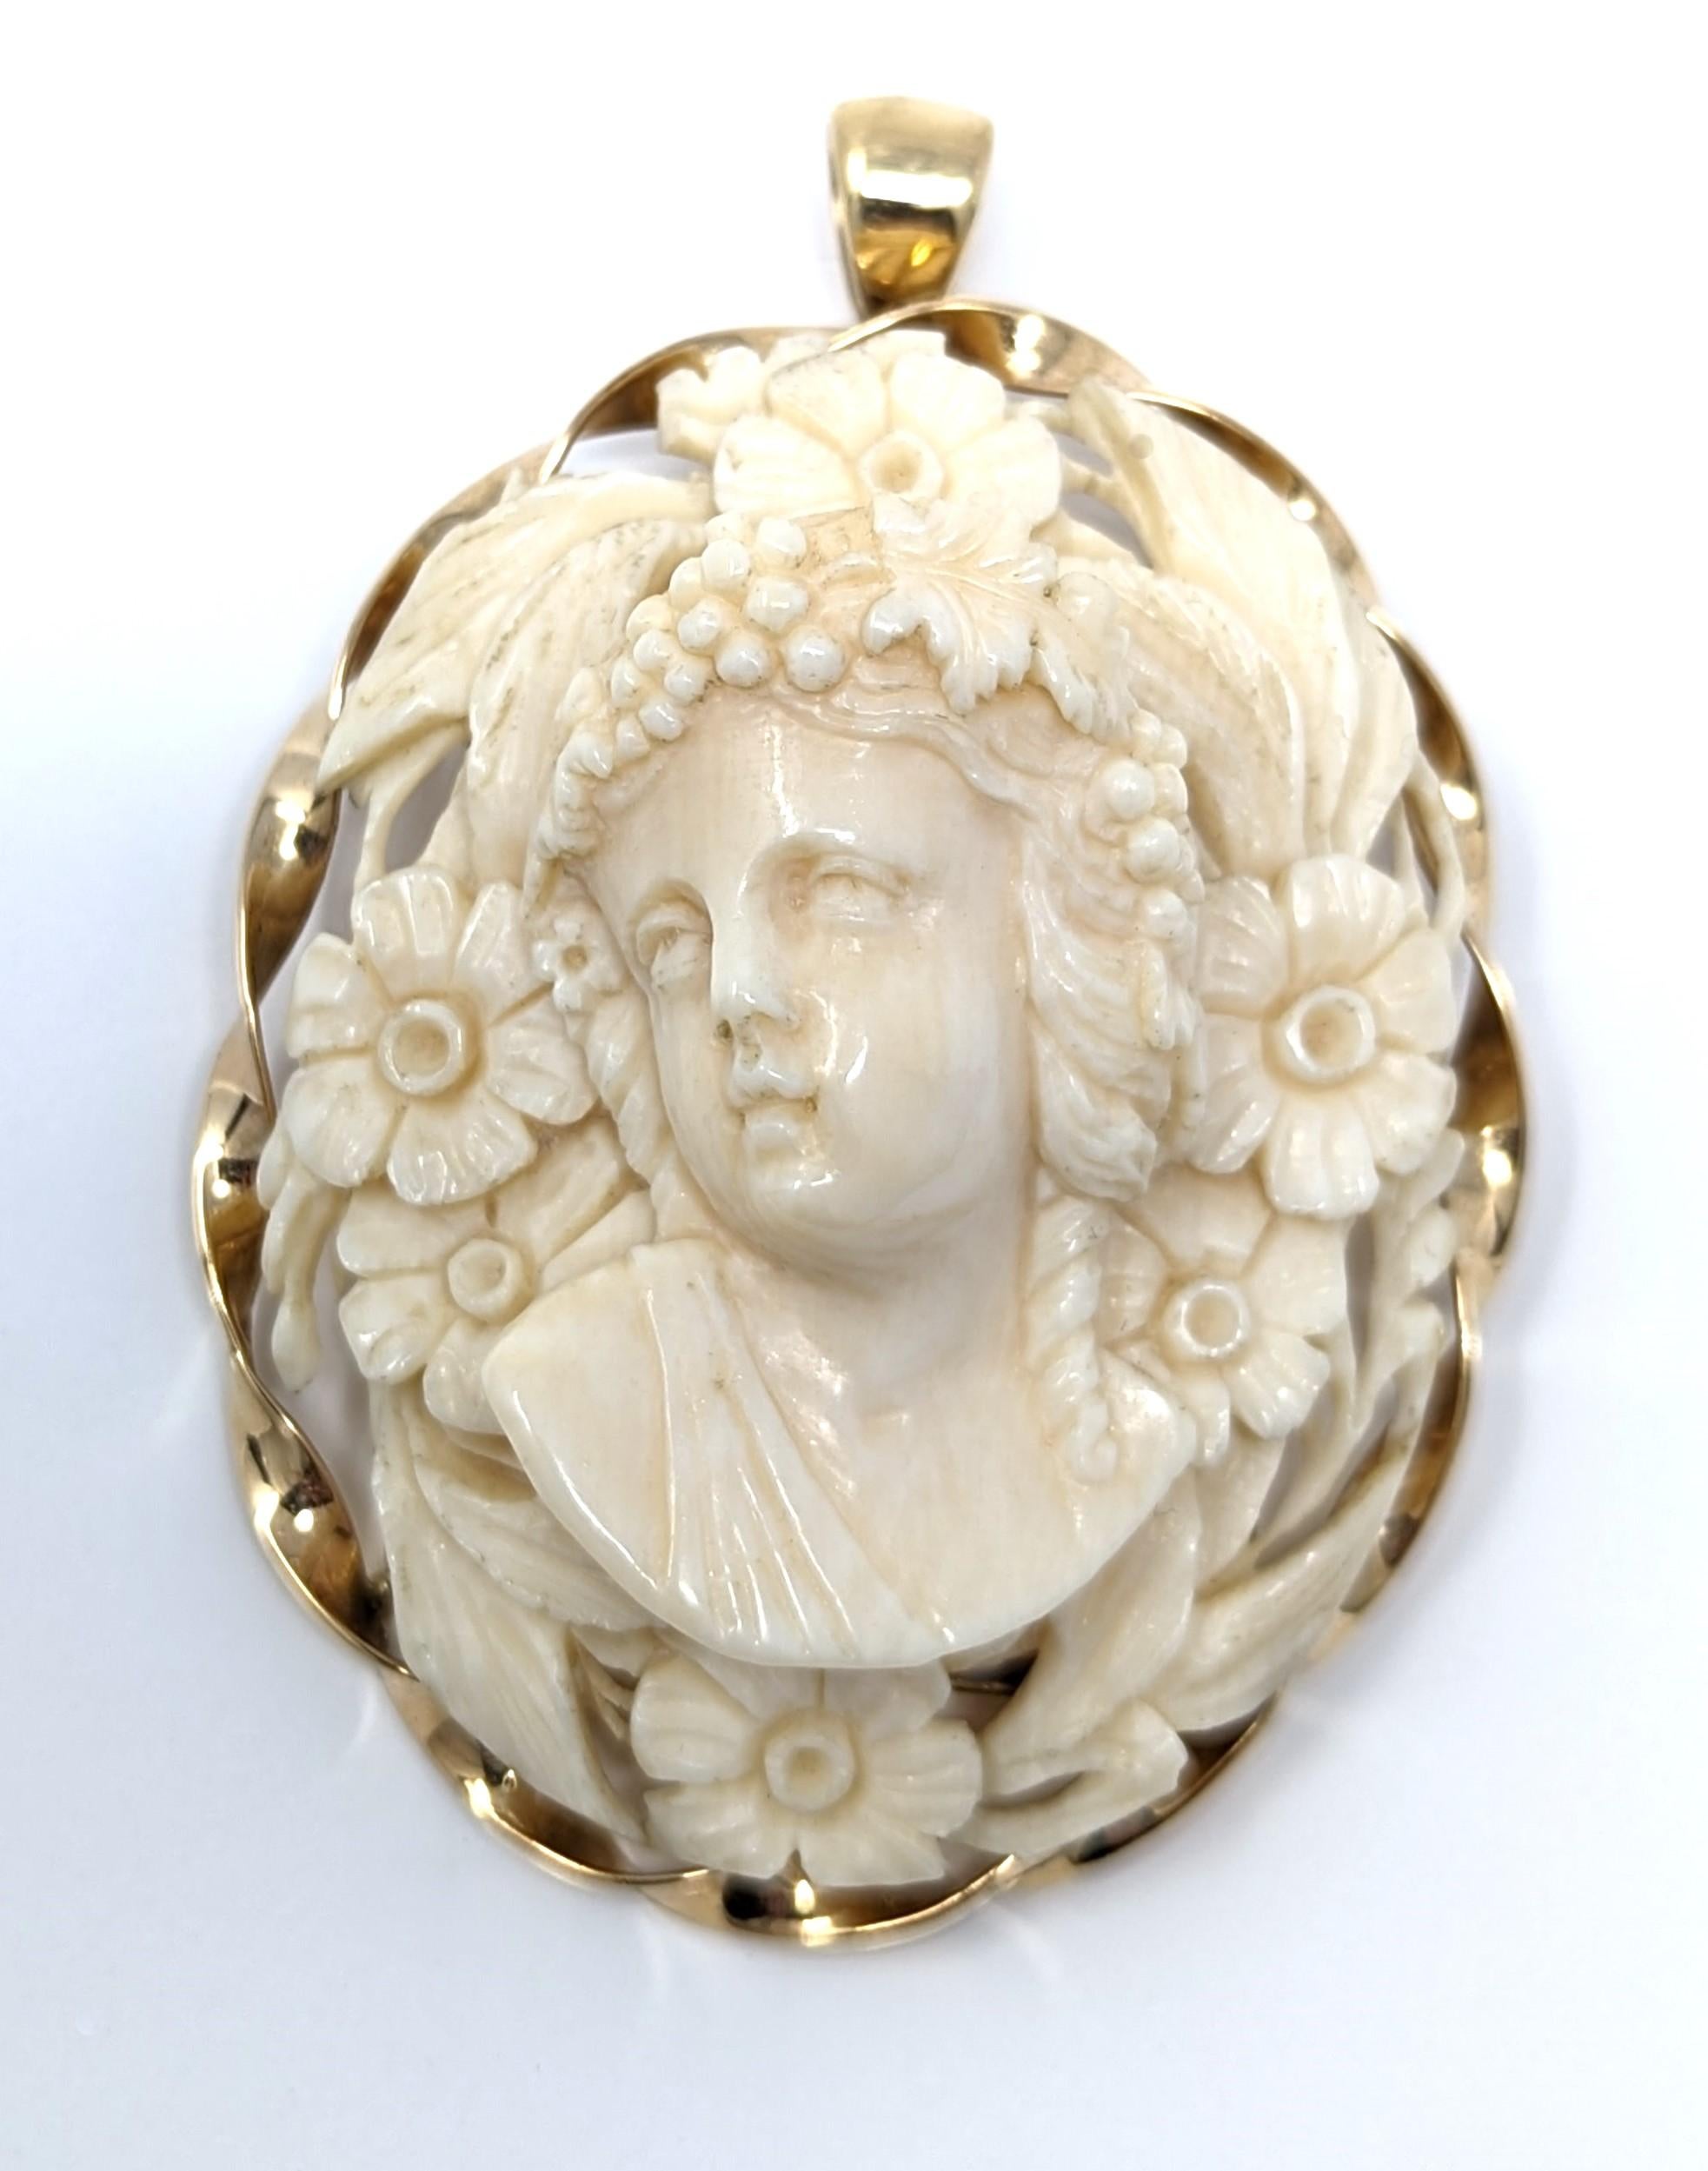 Stunning antique high relief hand carved bone cameo, set with an elegant twisted rope border in 14k solid yellow gold. Can be worn as either a pendant or as a brooch, makes for a wonderful conversation piece! This piece is beautifully detailed and